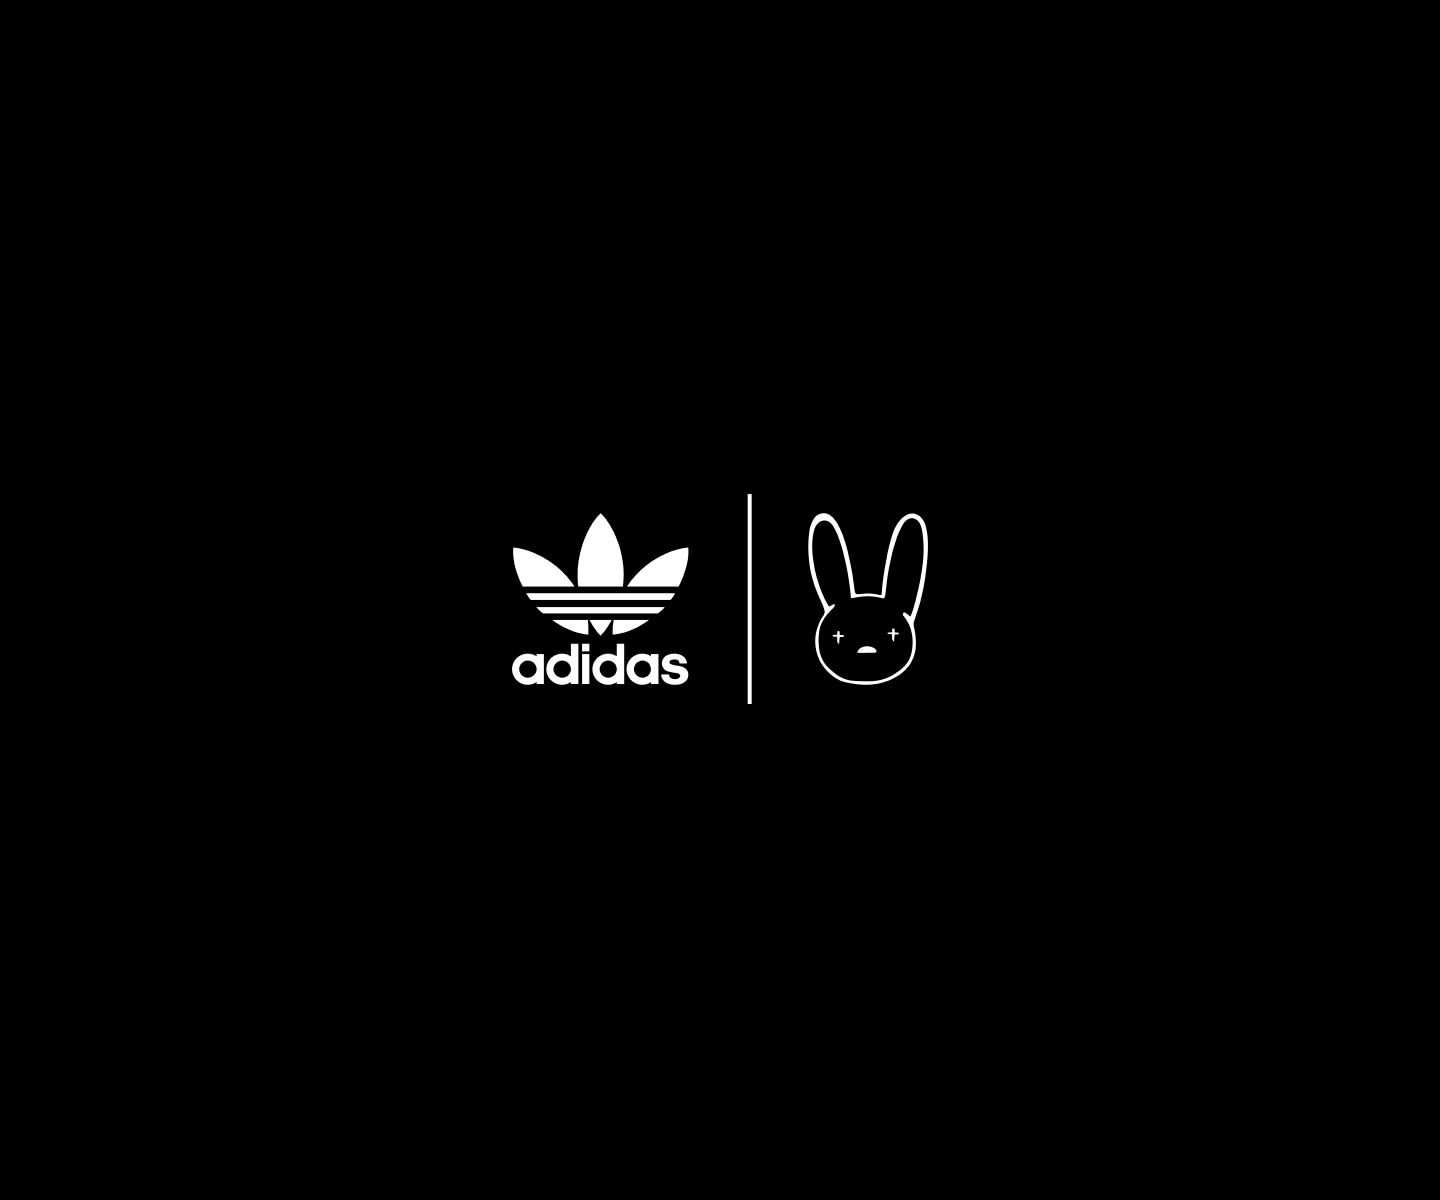 The adidas Originals x Bad Bunny logo is displayed against a black background.